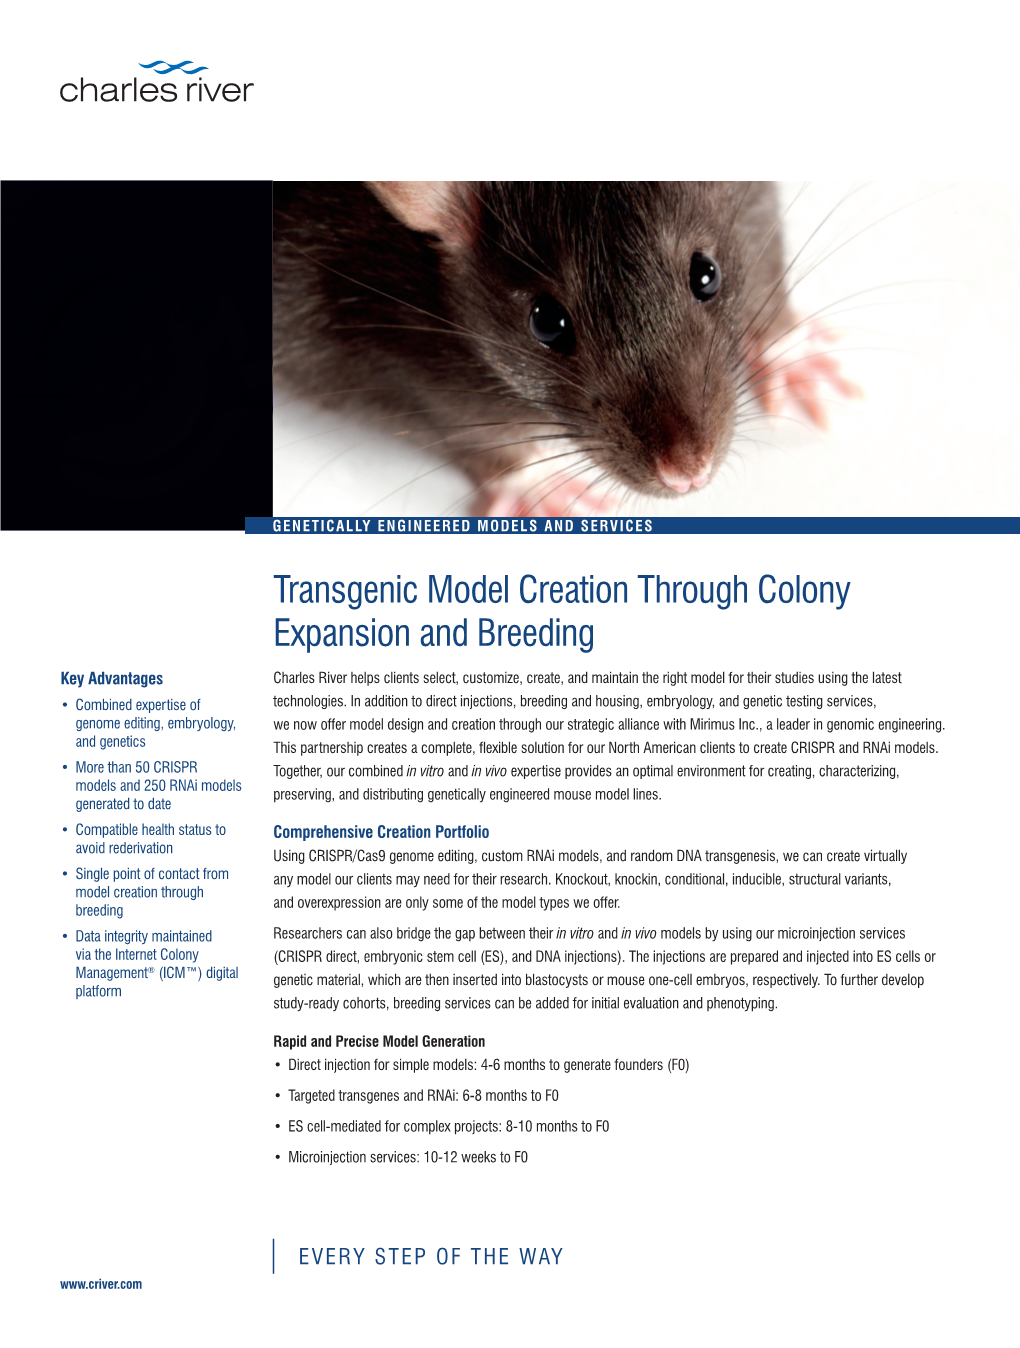 Transgenic Model Creation Through Colony Expansion and Breeding